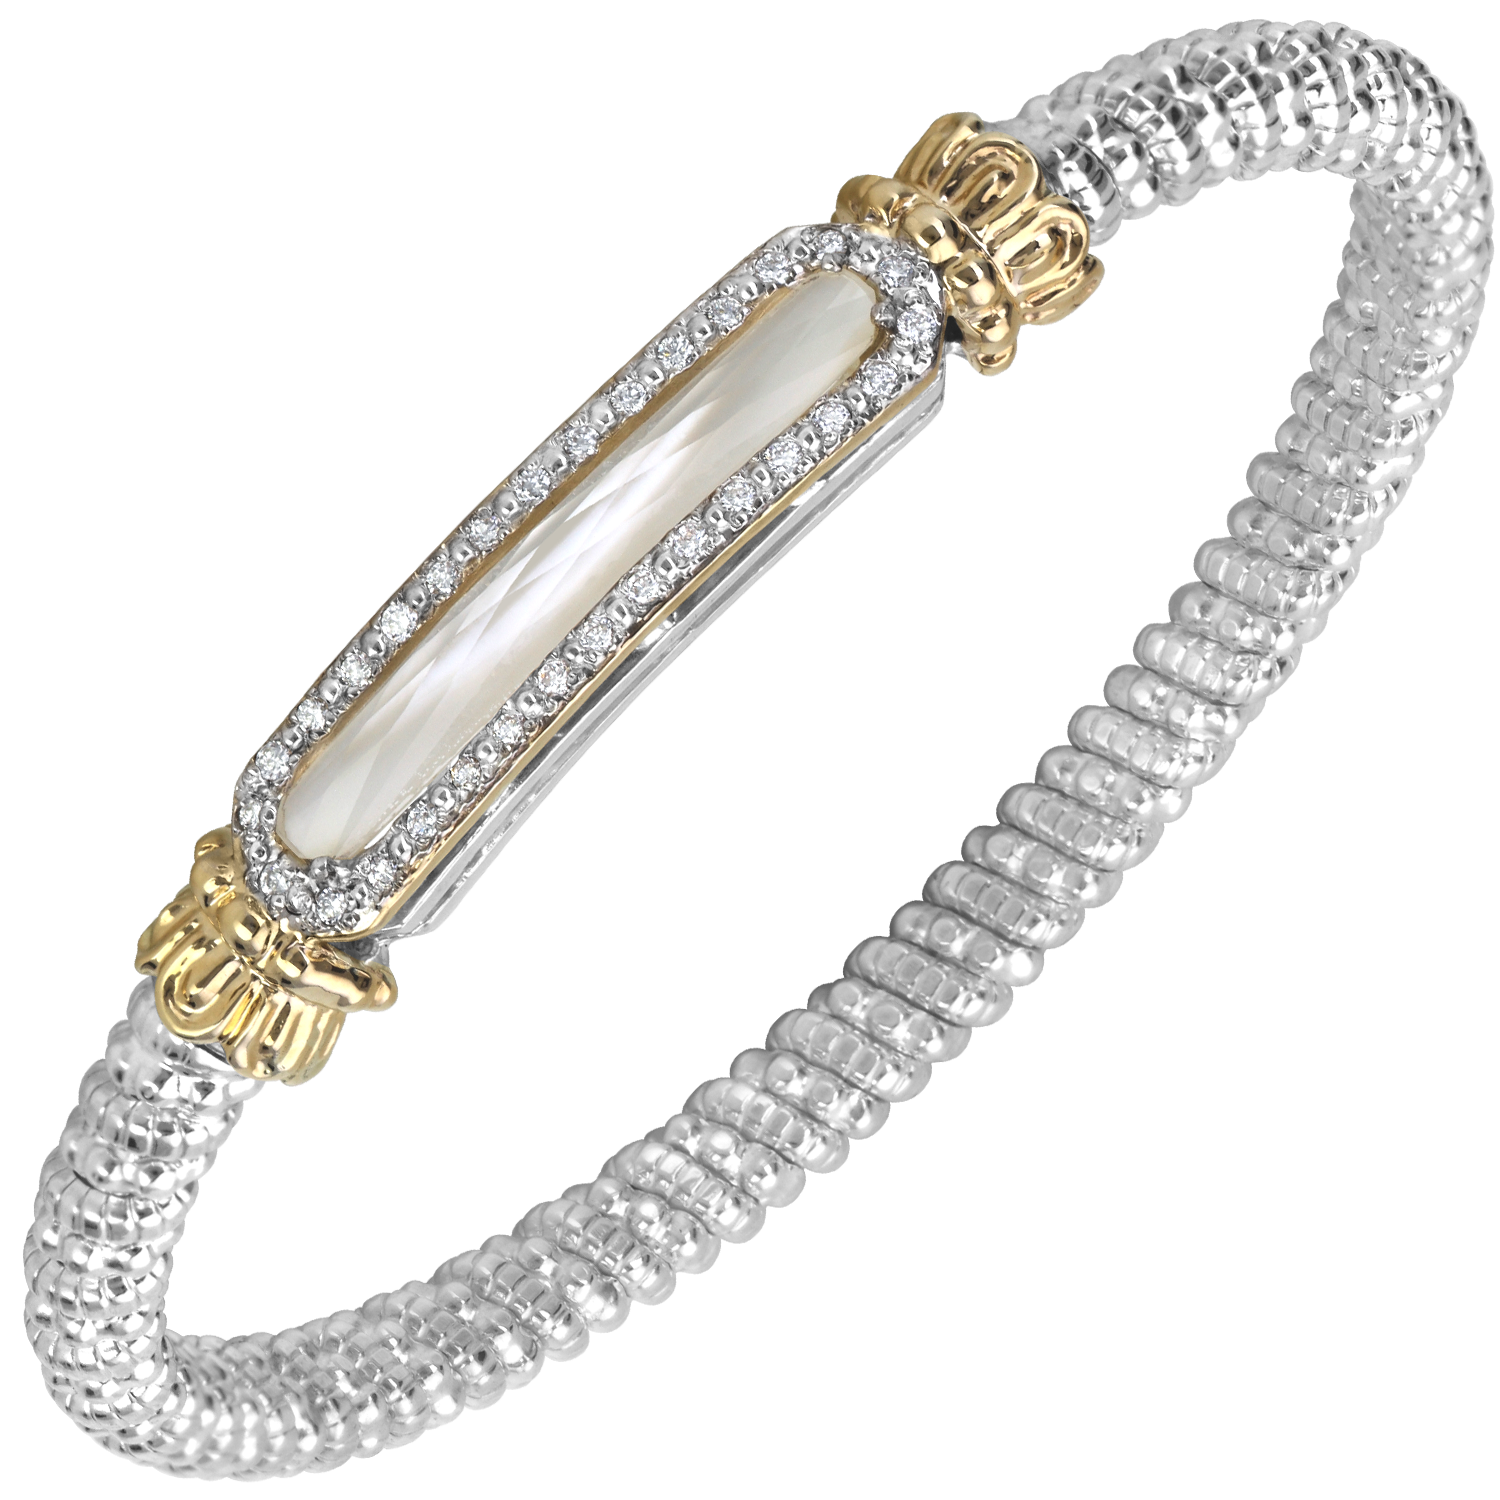 Vahan Art Deco Sterling Silver & Yellow Gold Pearl Bracelet Galloway and Moseley, Inc. Sumter, SC